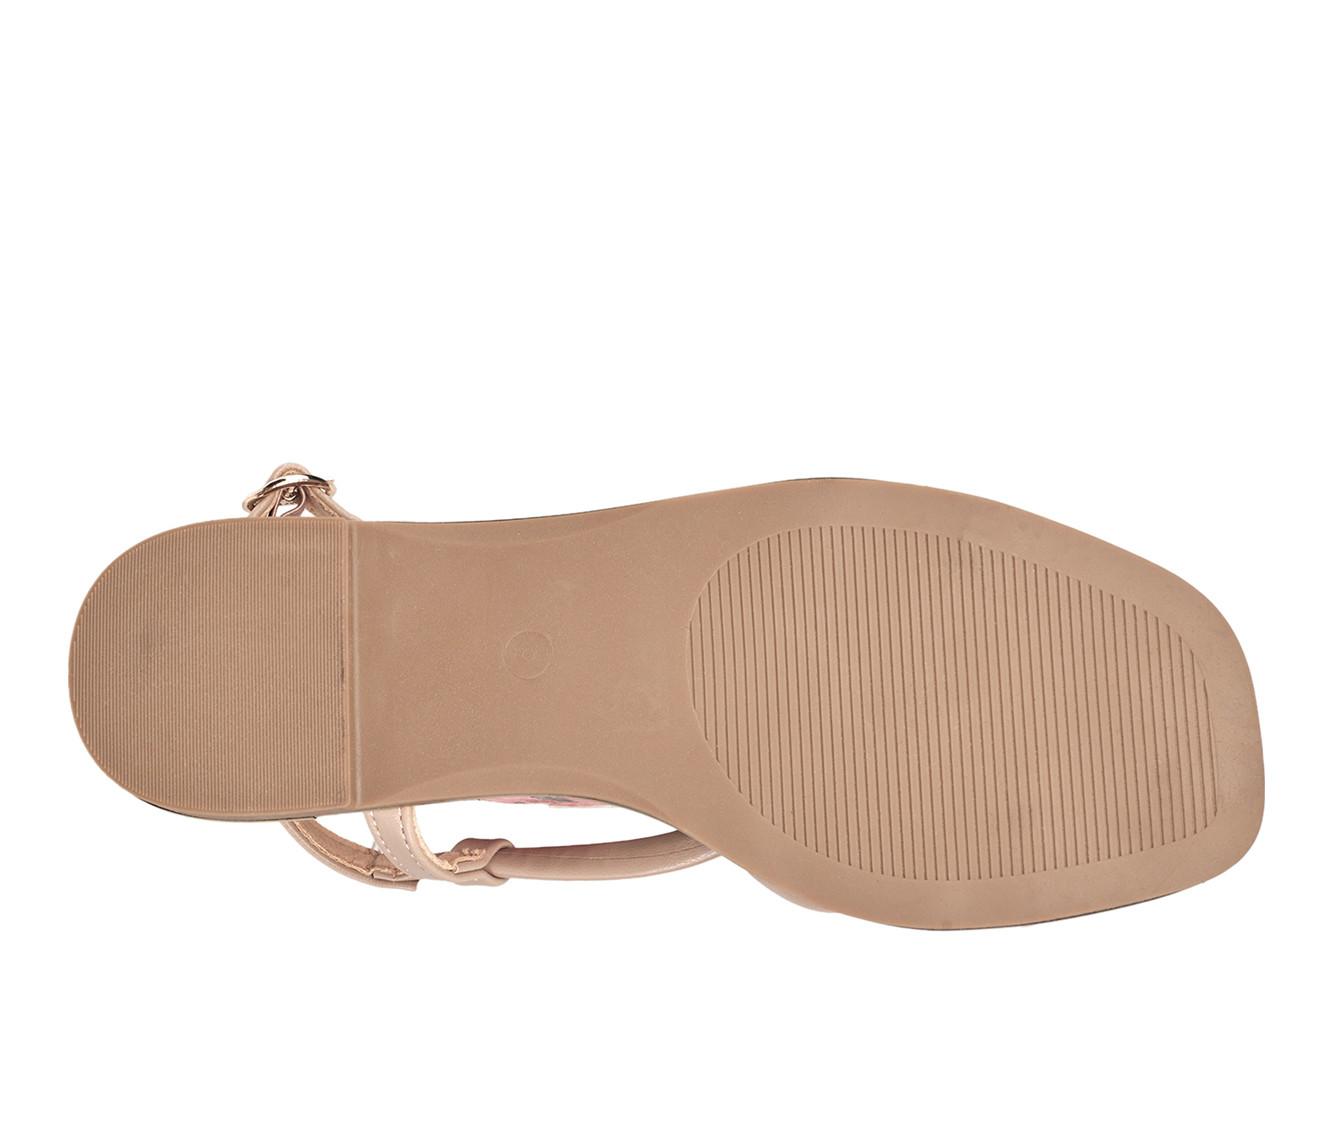 Women's French Connection Tubes Sandals